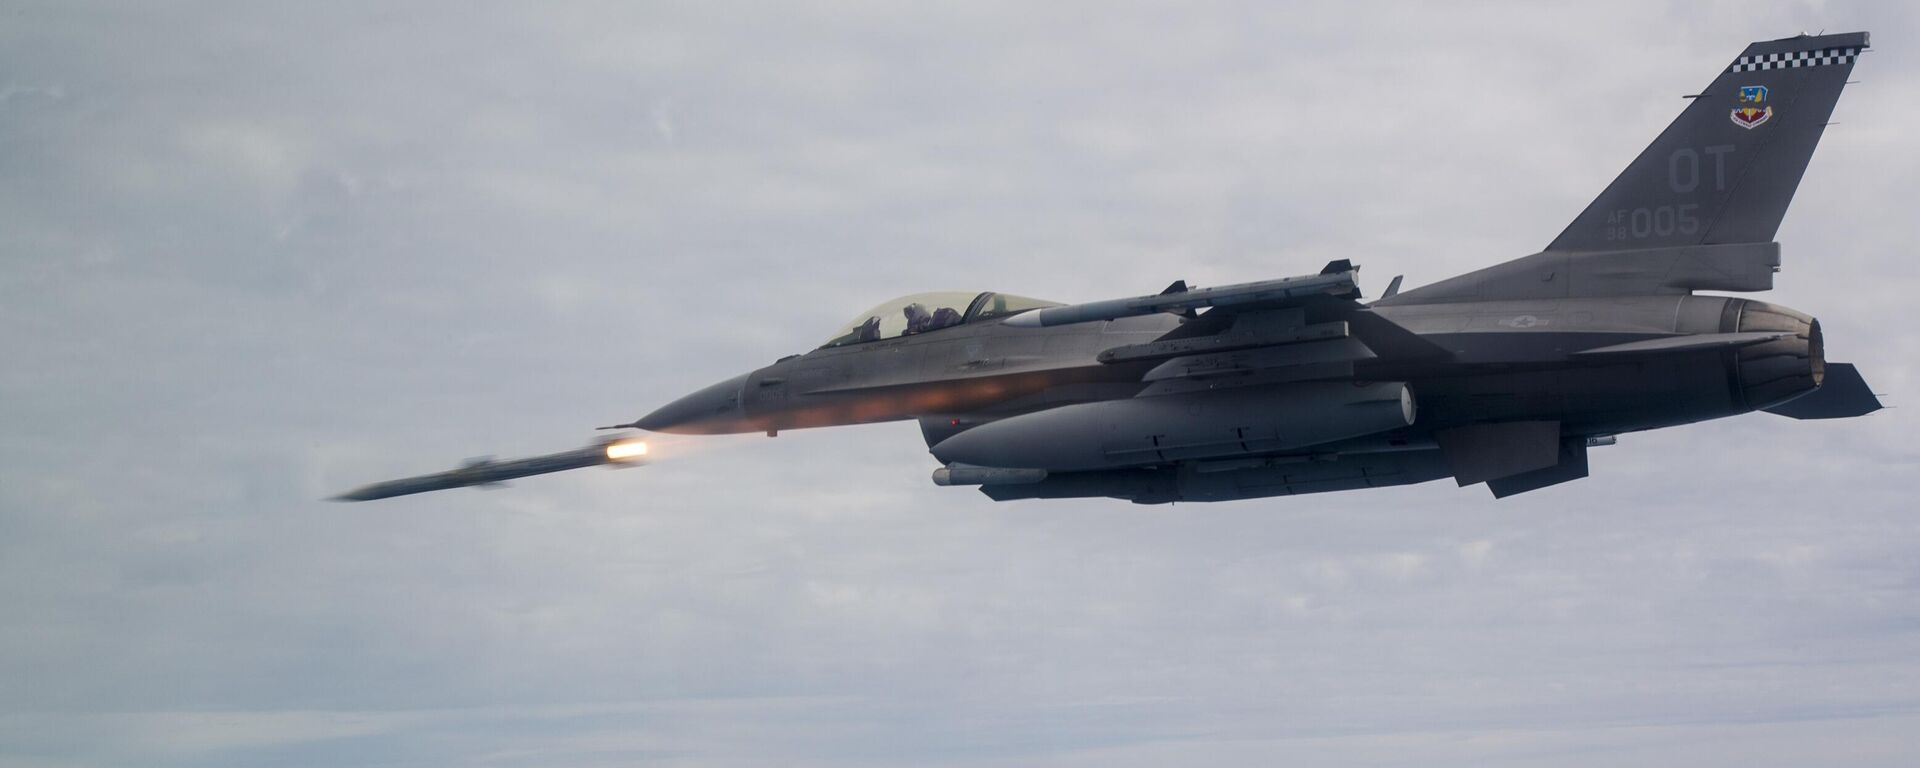 An F-16C Fighting Falcon assigned to the 85th Test Evaluation Squadron shoots an AIM-120 Advanced Medium-Range Air-to-Air Missile, or AMRAAM over testing ranges near Eglin Air Force Base, Fla., March 19, 2019. - Sputnik International, 1920, 09.03.2023